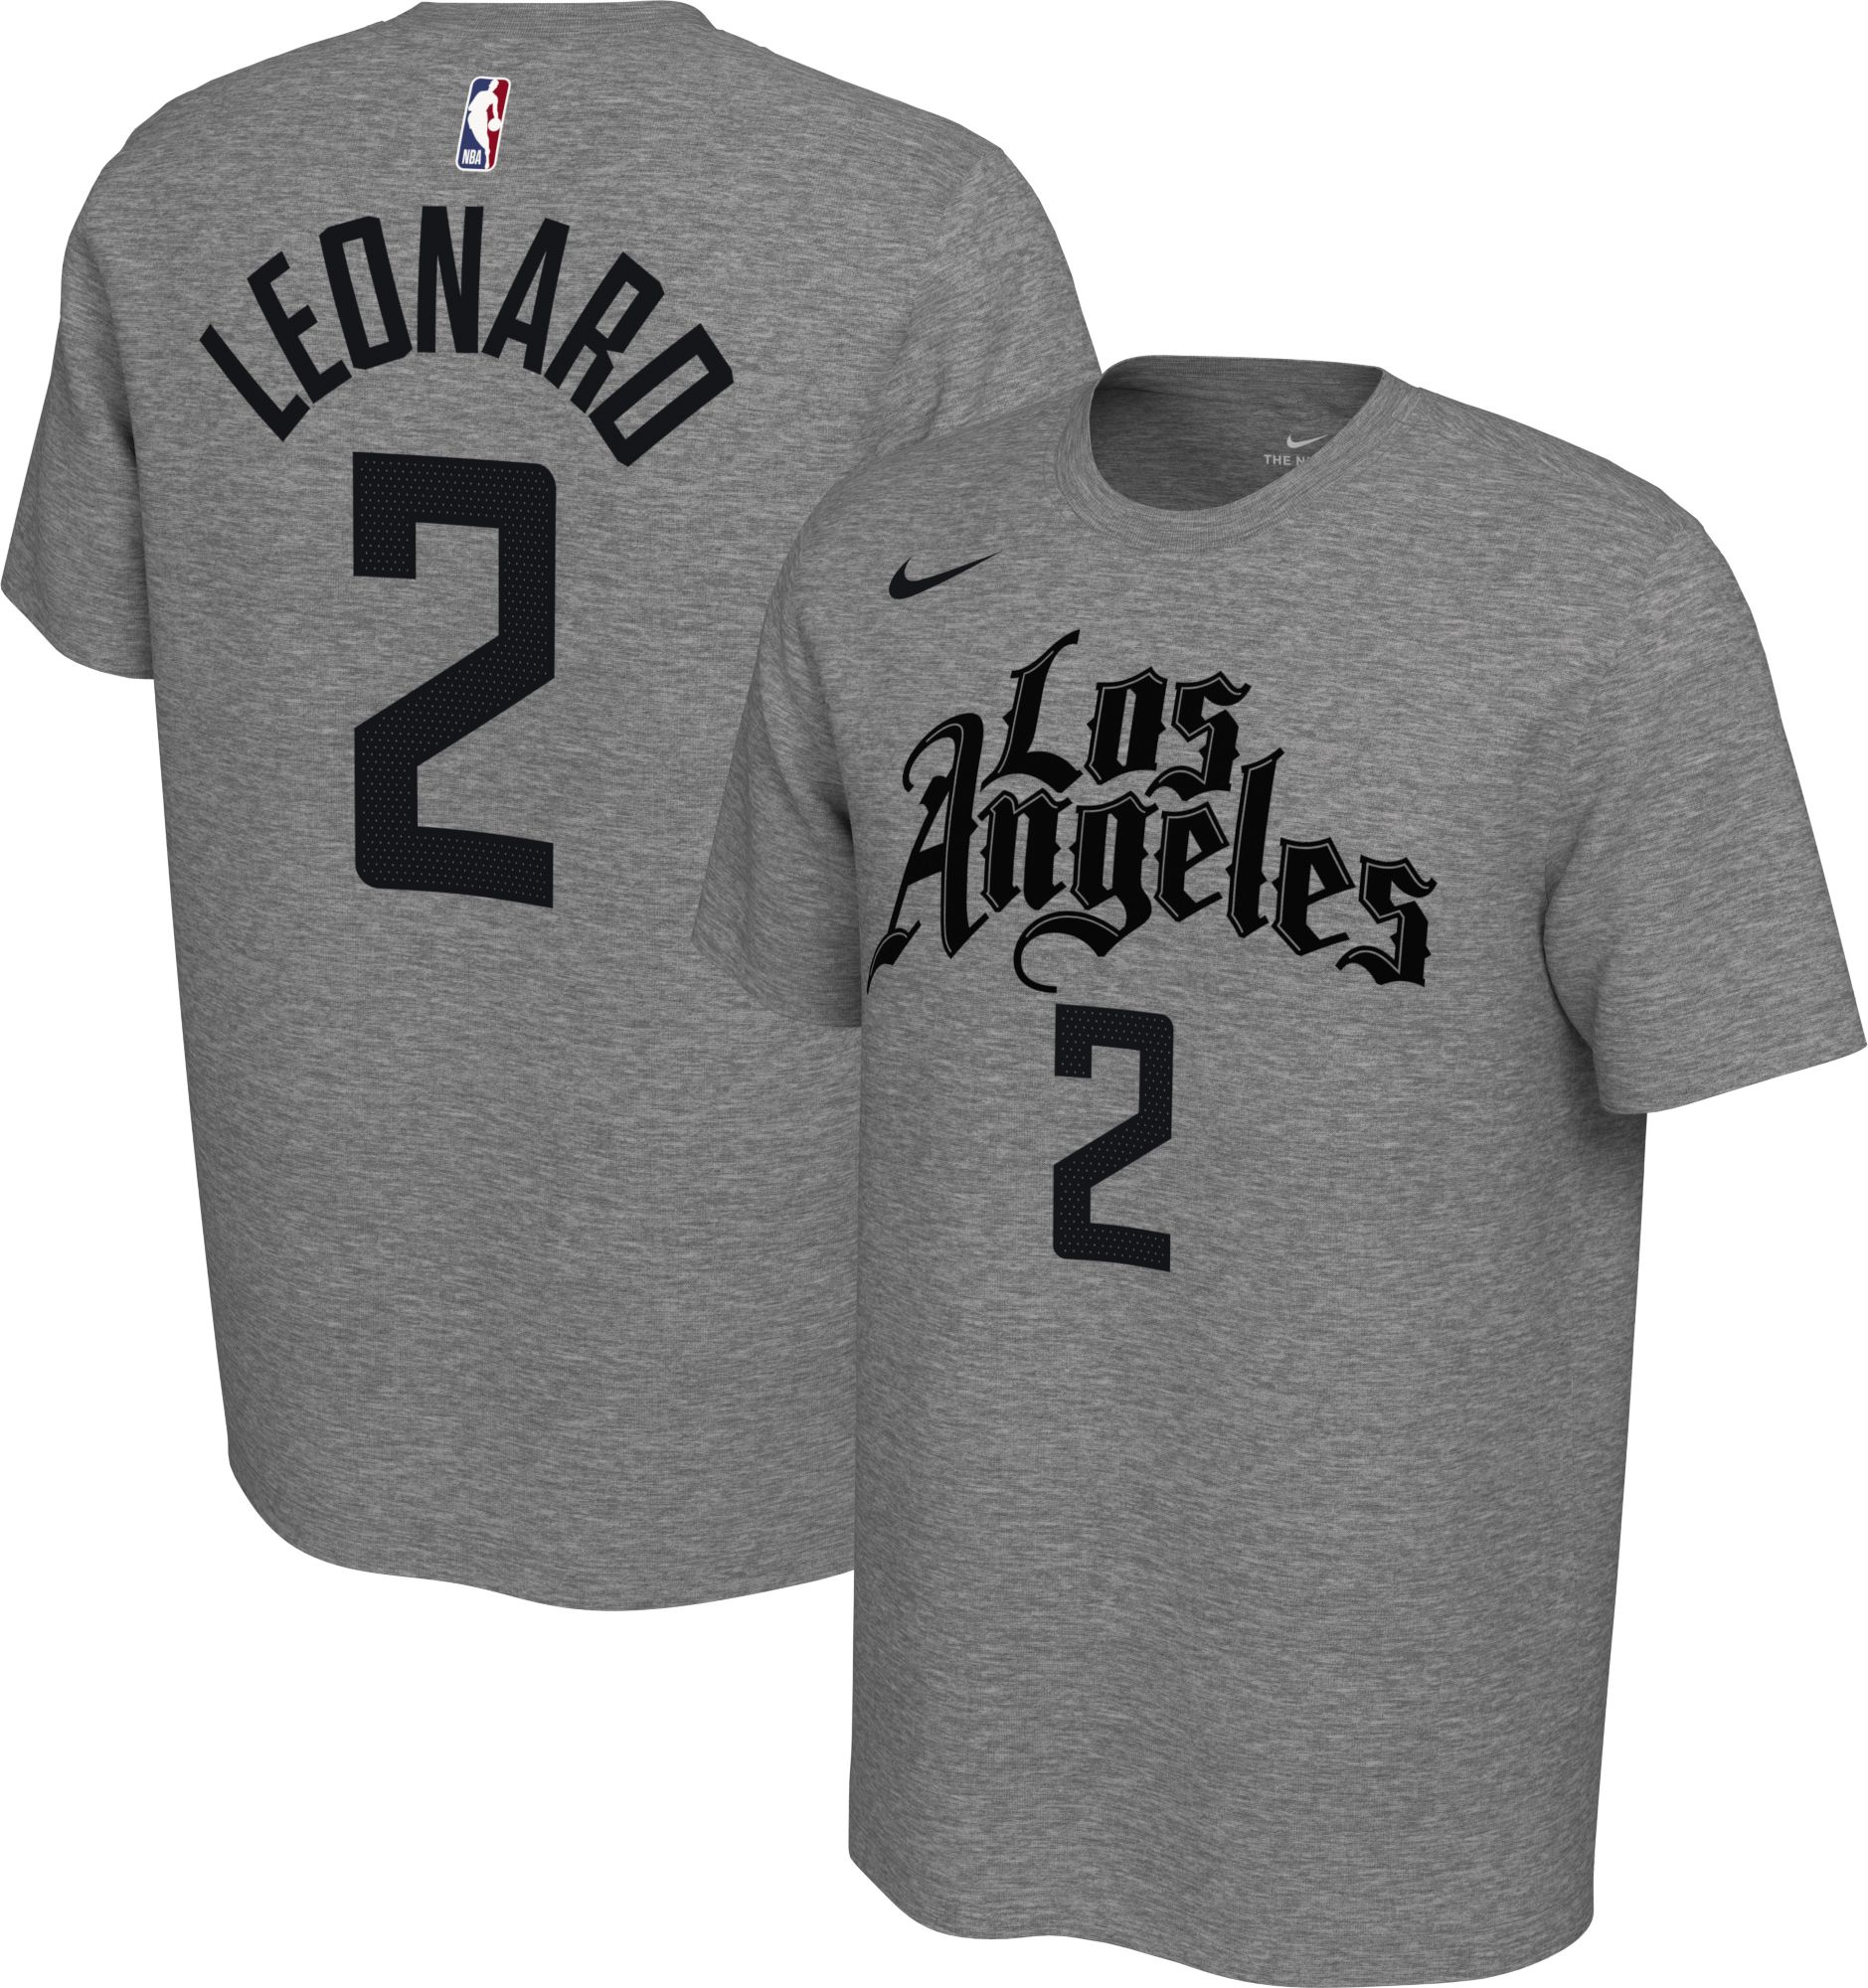 los angeles clippers shirt